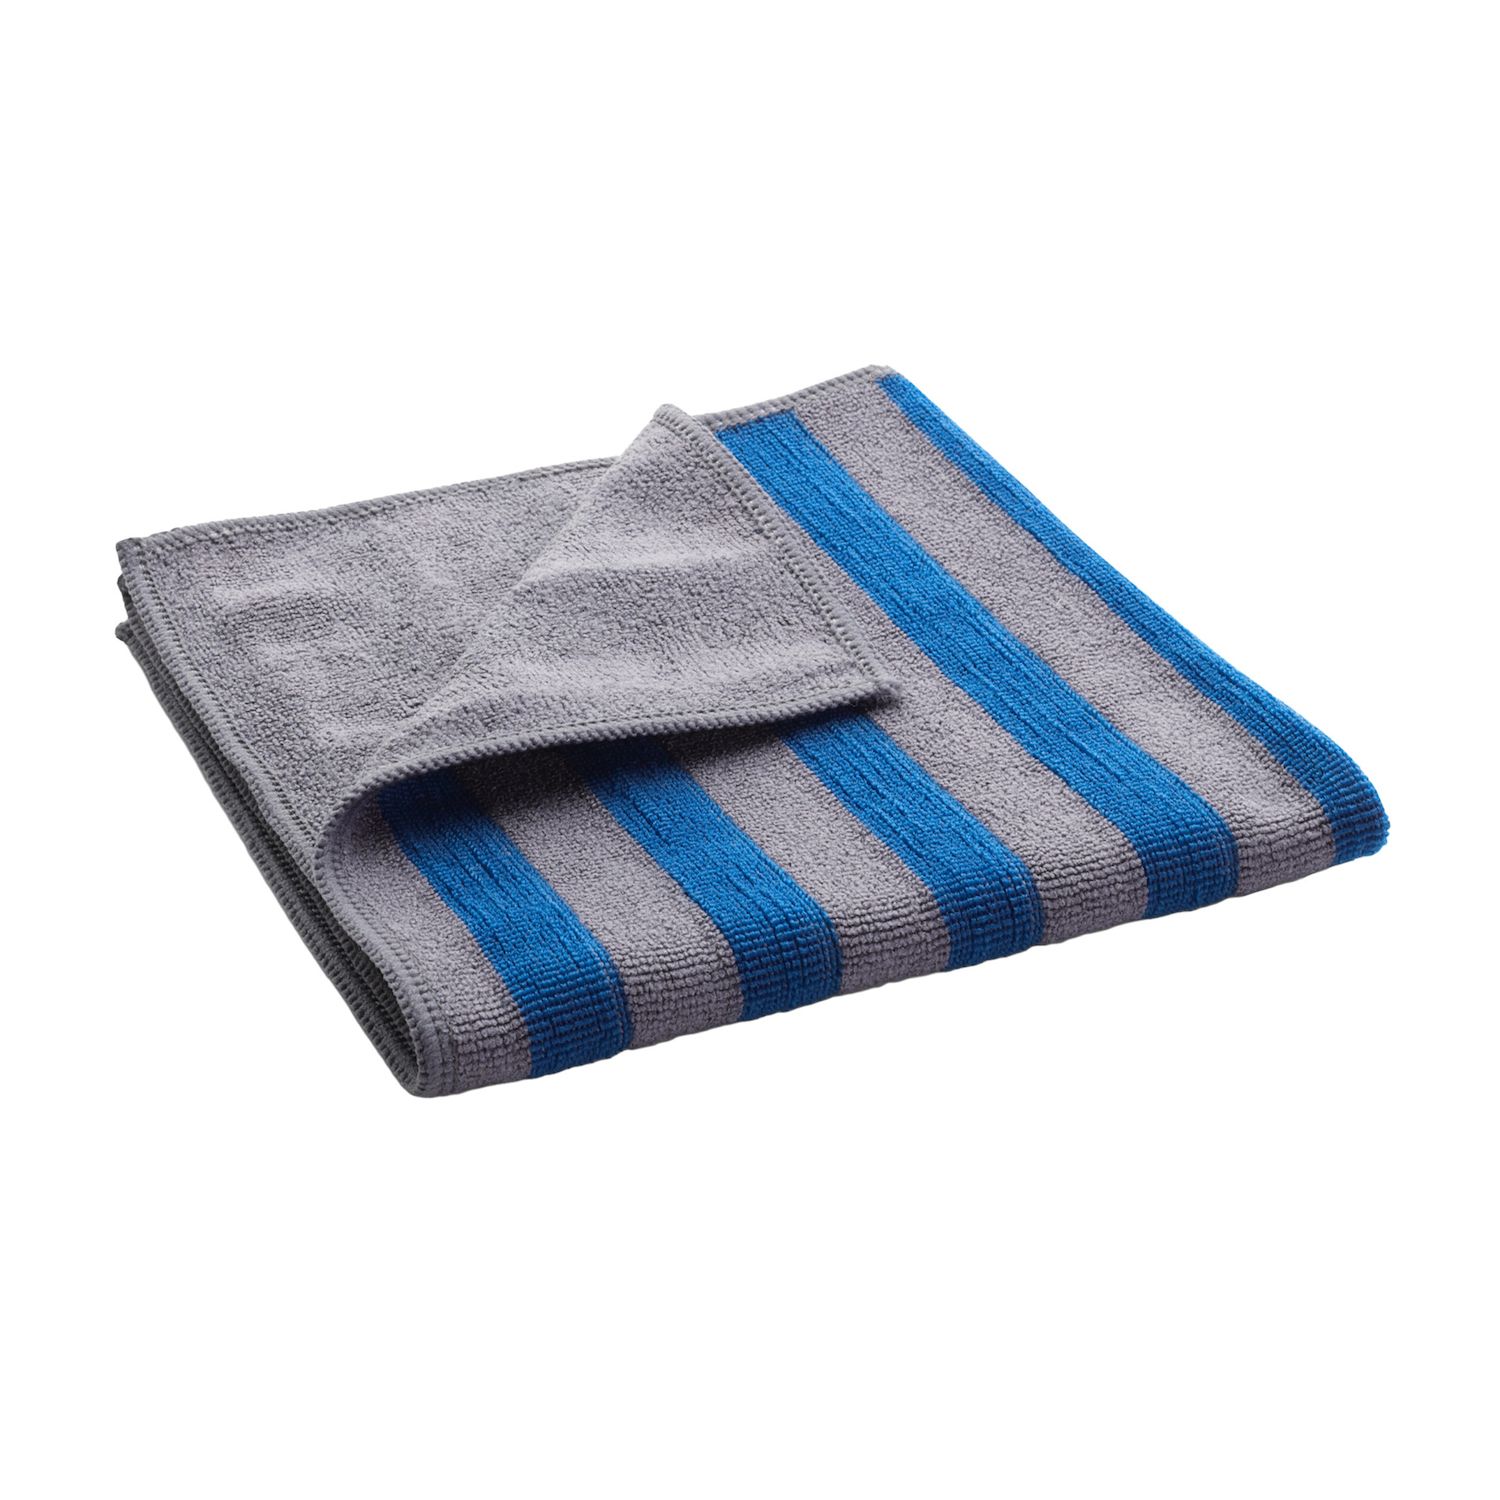 Image for E-Cloth Range & Stovetop Microfiber Cleaning Cloth at Kohl's.